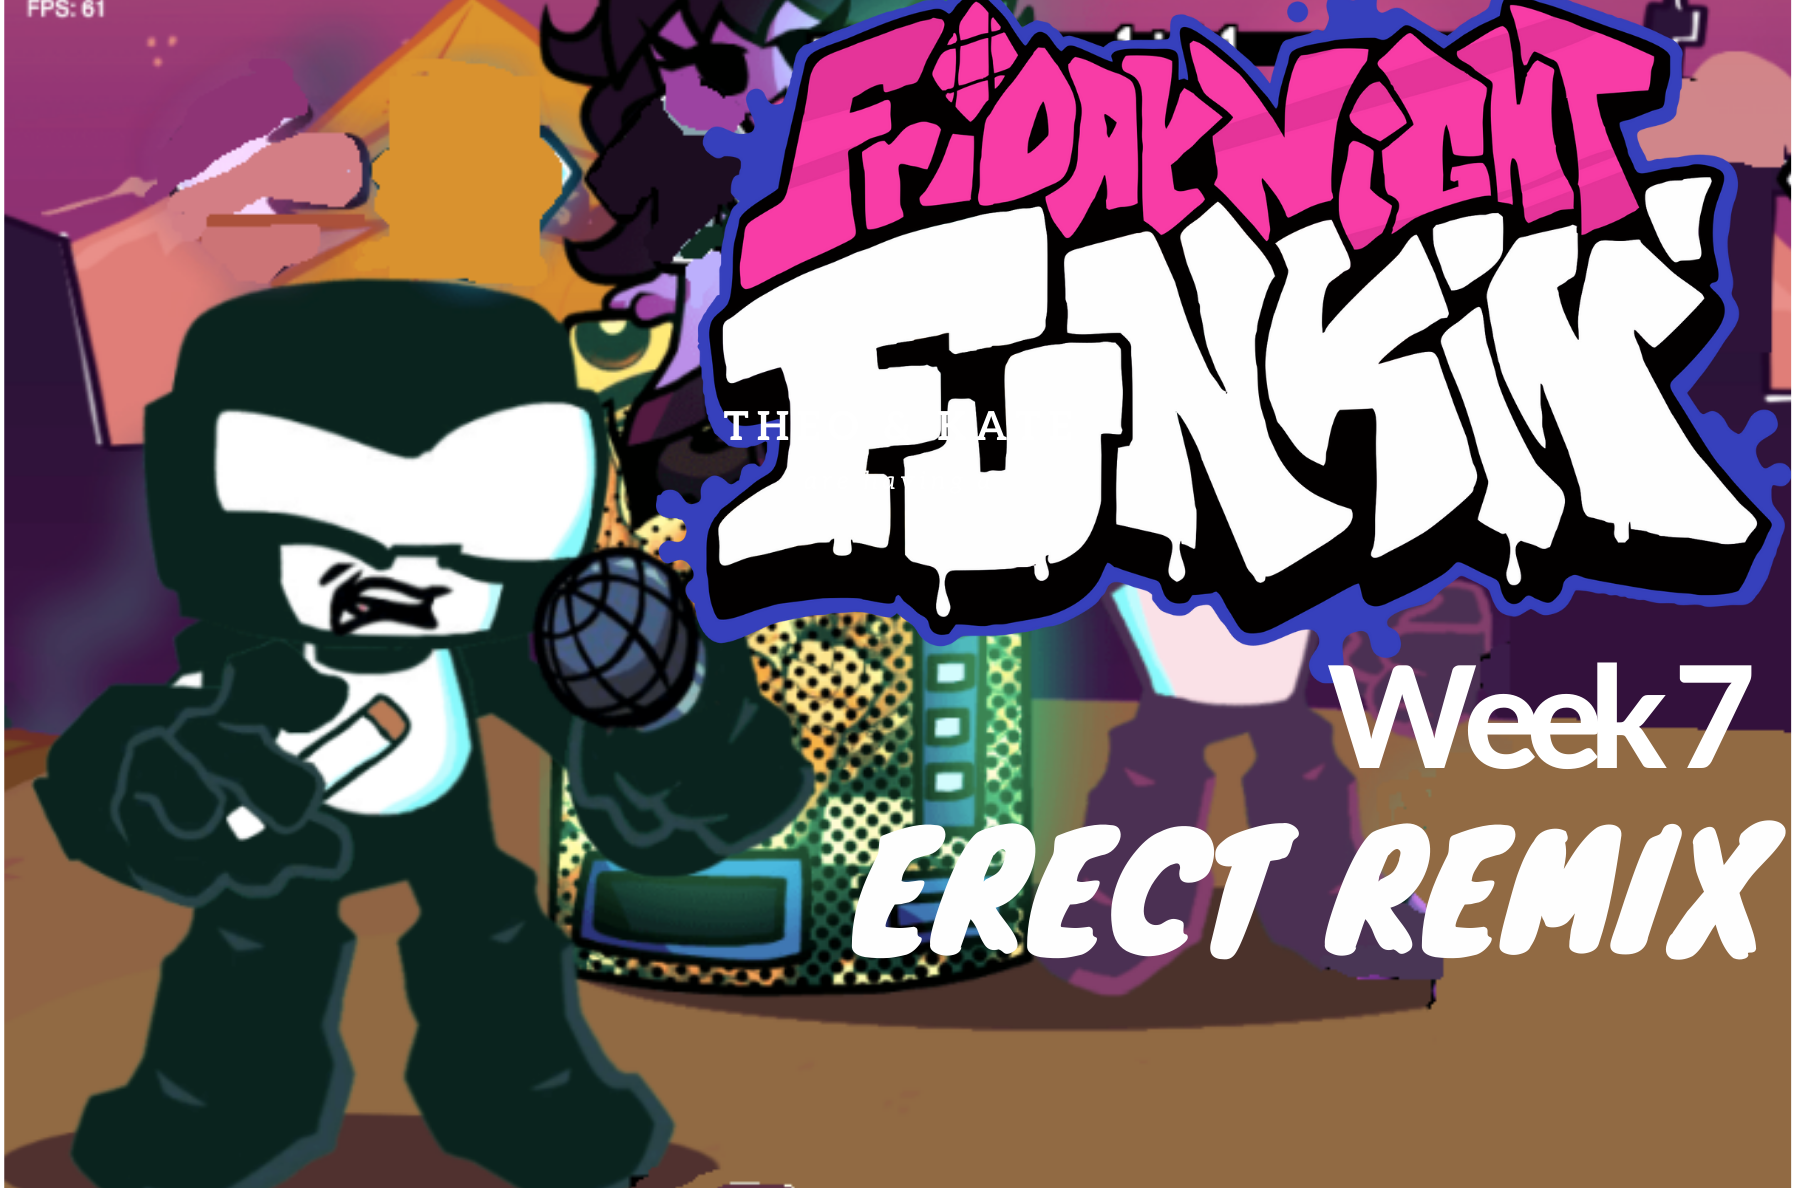 FNF: Week 7 Erect Remix (Fanmade) 🔥 Play online